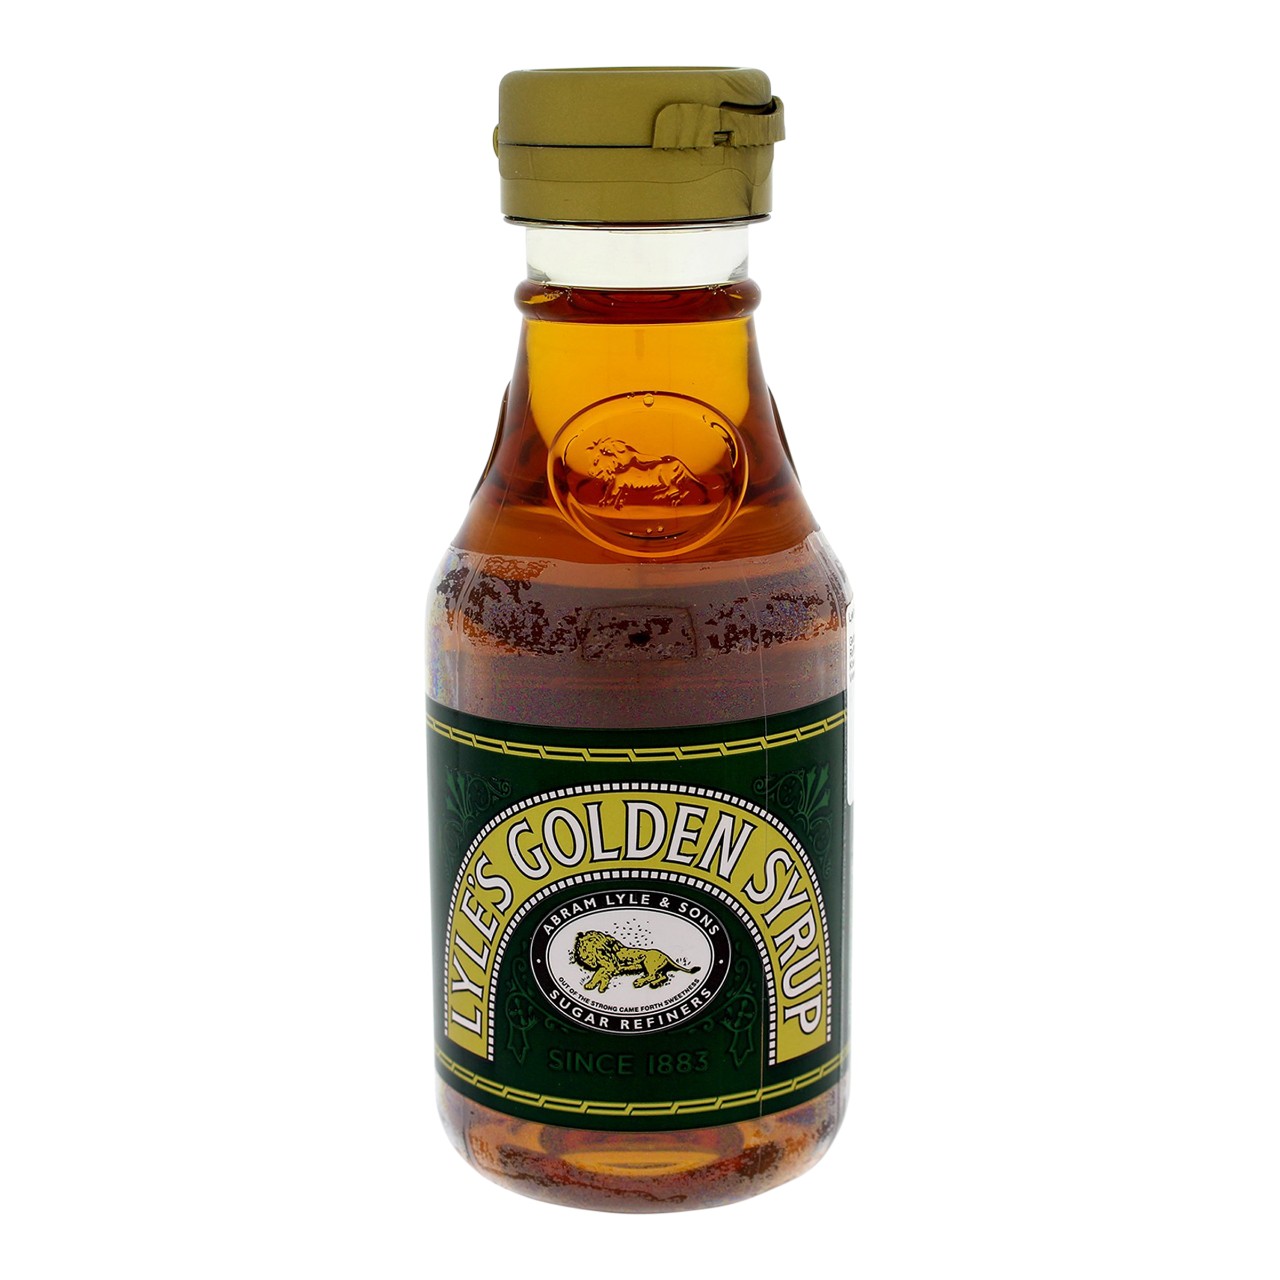 Golden syrup